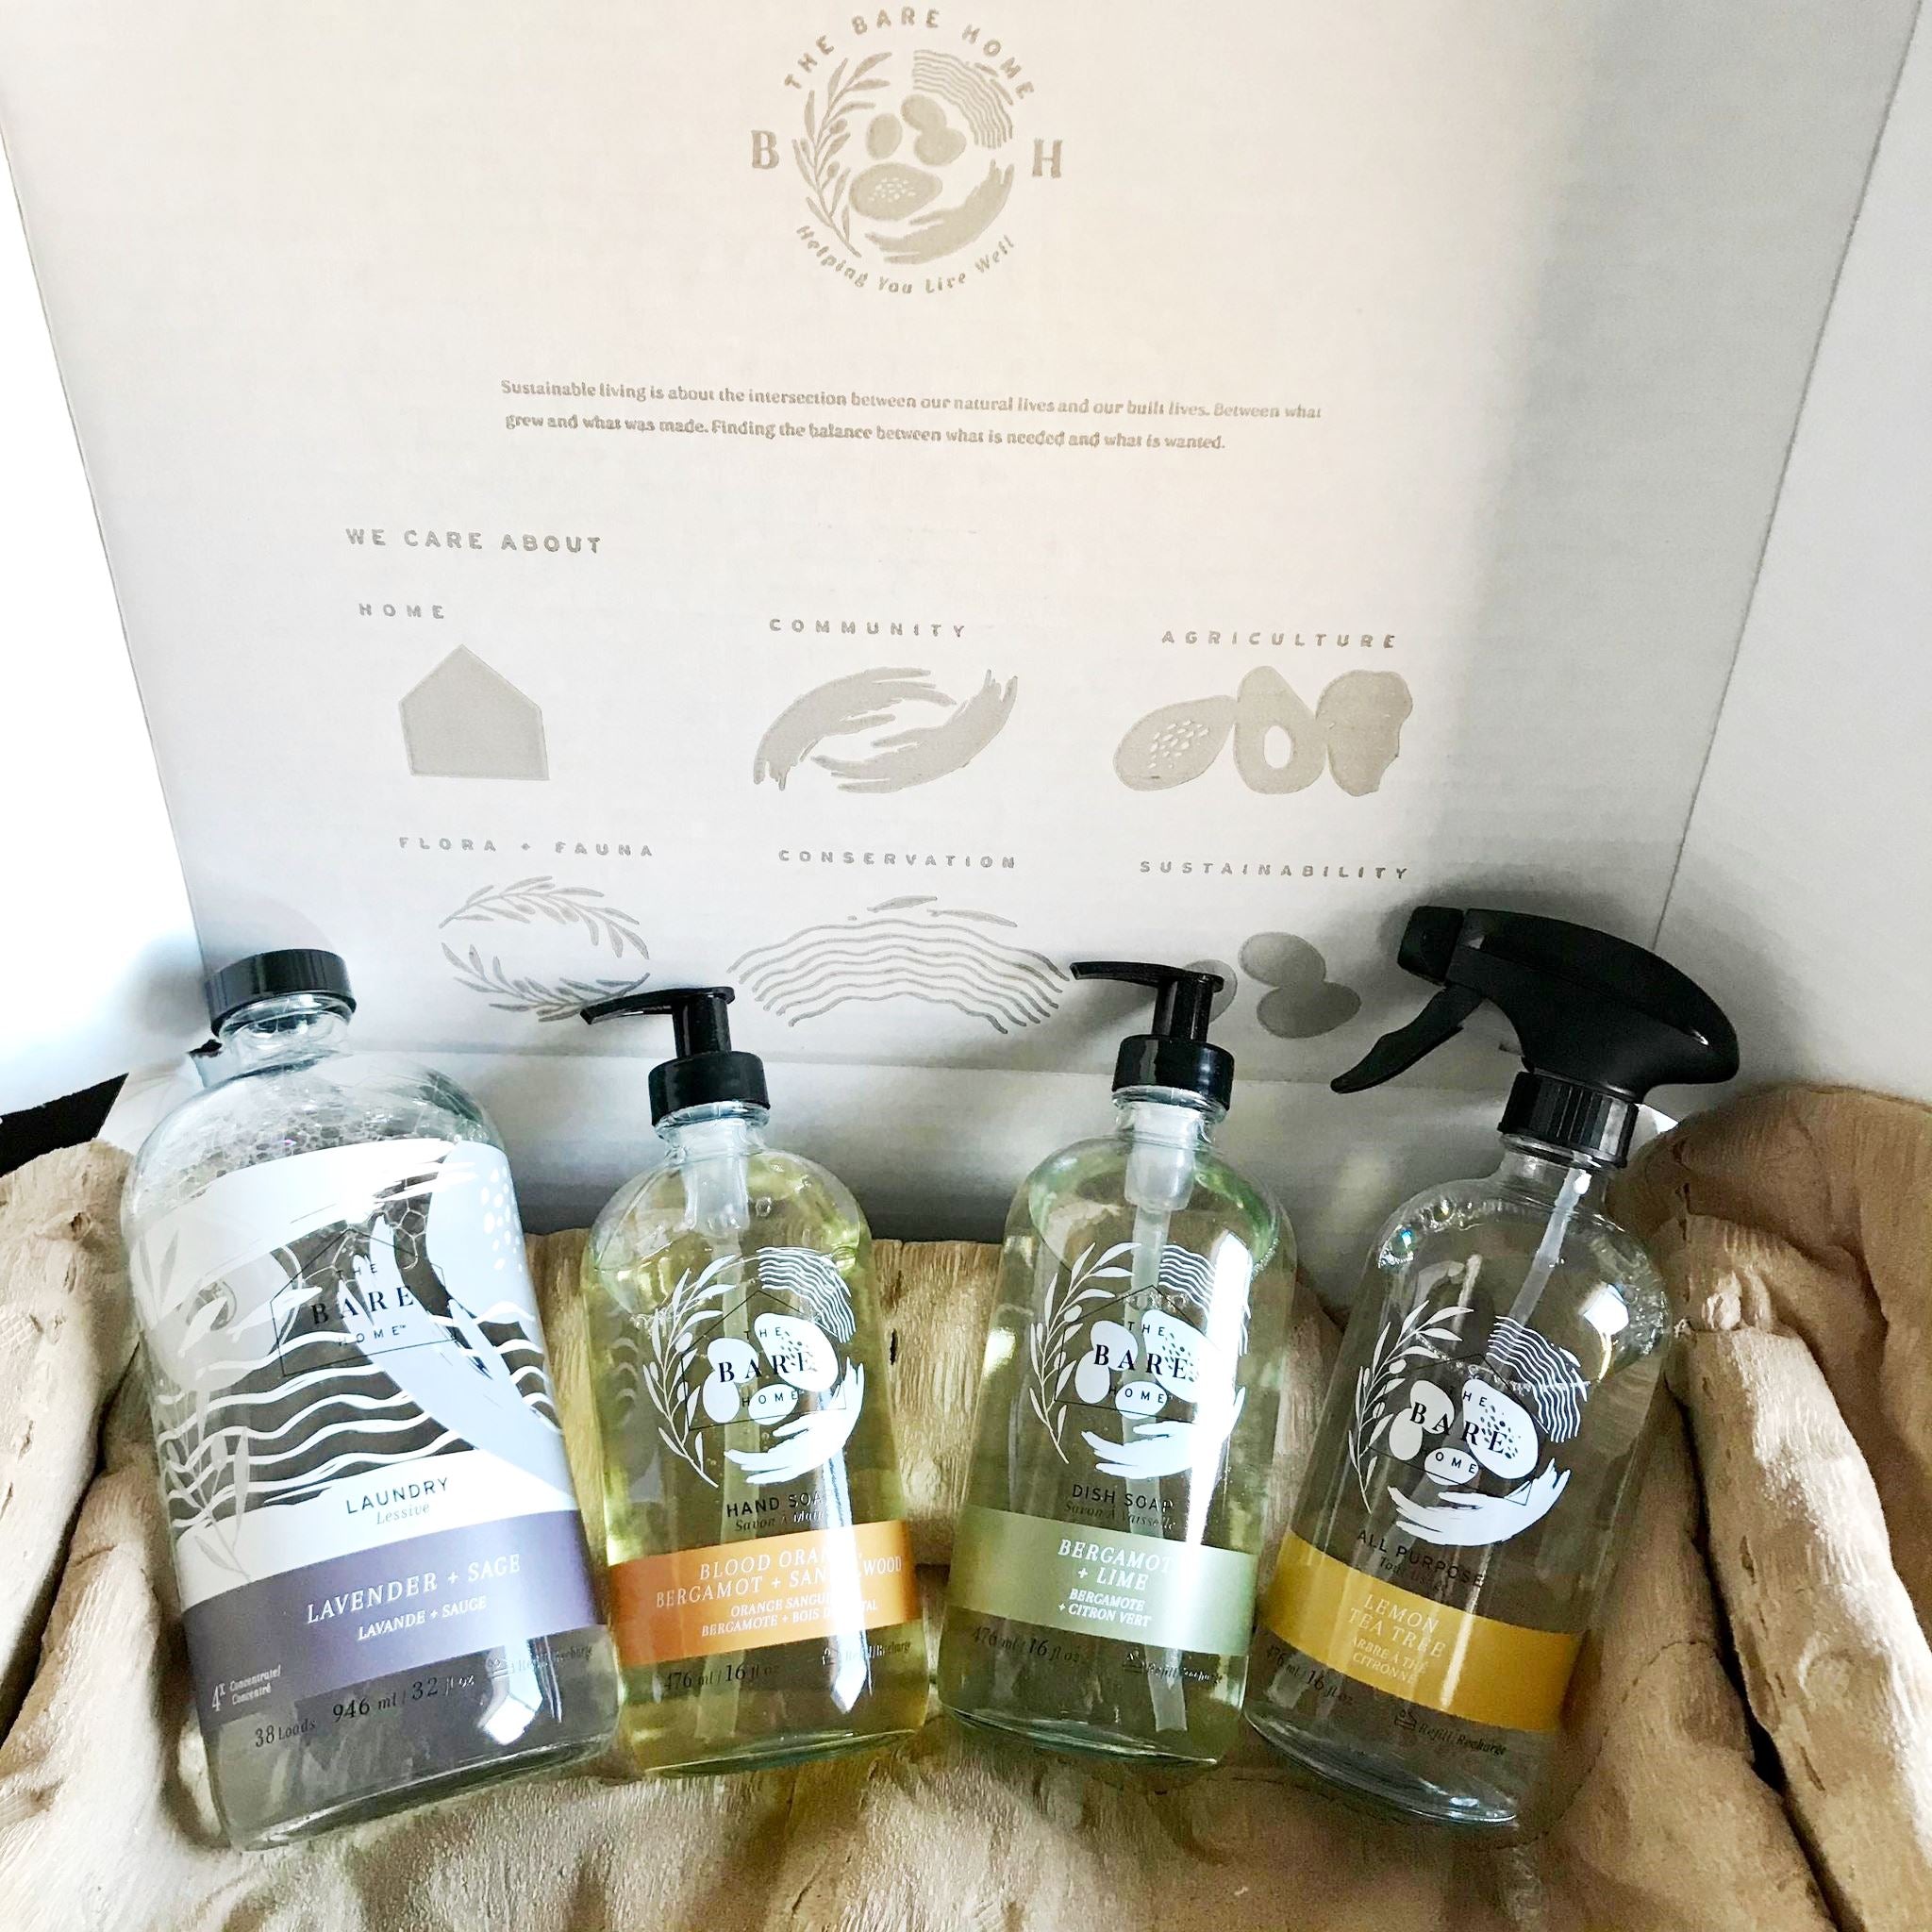 Liquid essential oil scented laundry detergent, hand soap, dish soap and all purpose cleaner in refillable glass bottles packaged together in a box as a way to sample the line of eco sustainable household products made in Canada by The Bare Home company based in Ontario